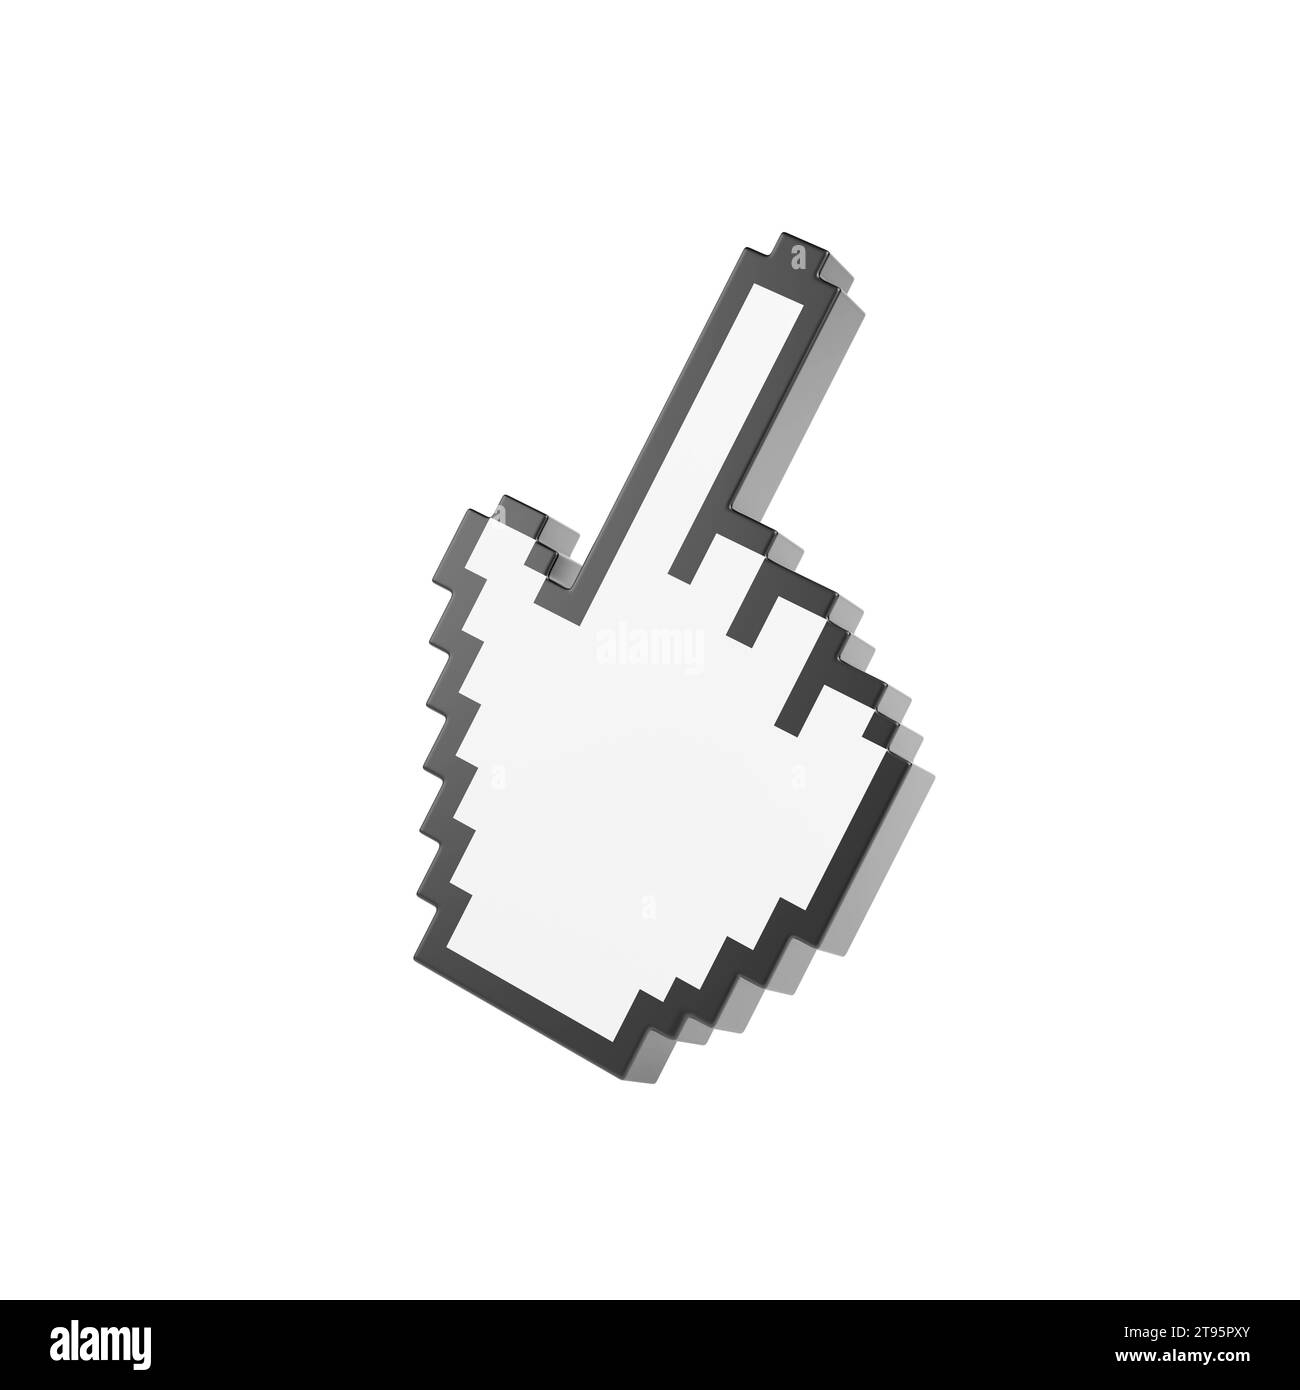 Hand cursor clicking isolated on white background. 3d illustration. Stock Photo